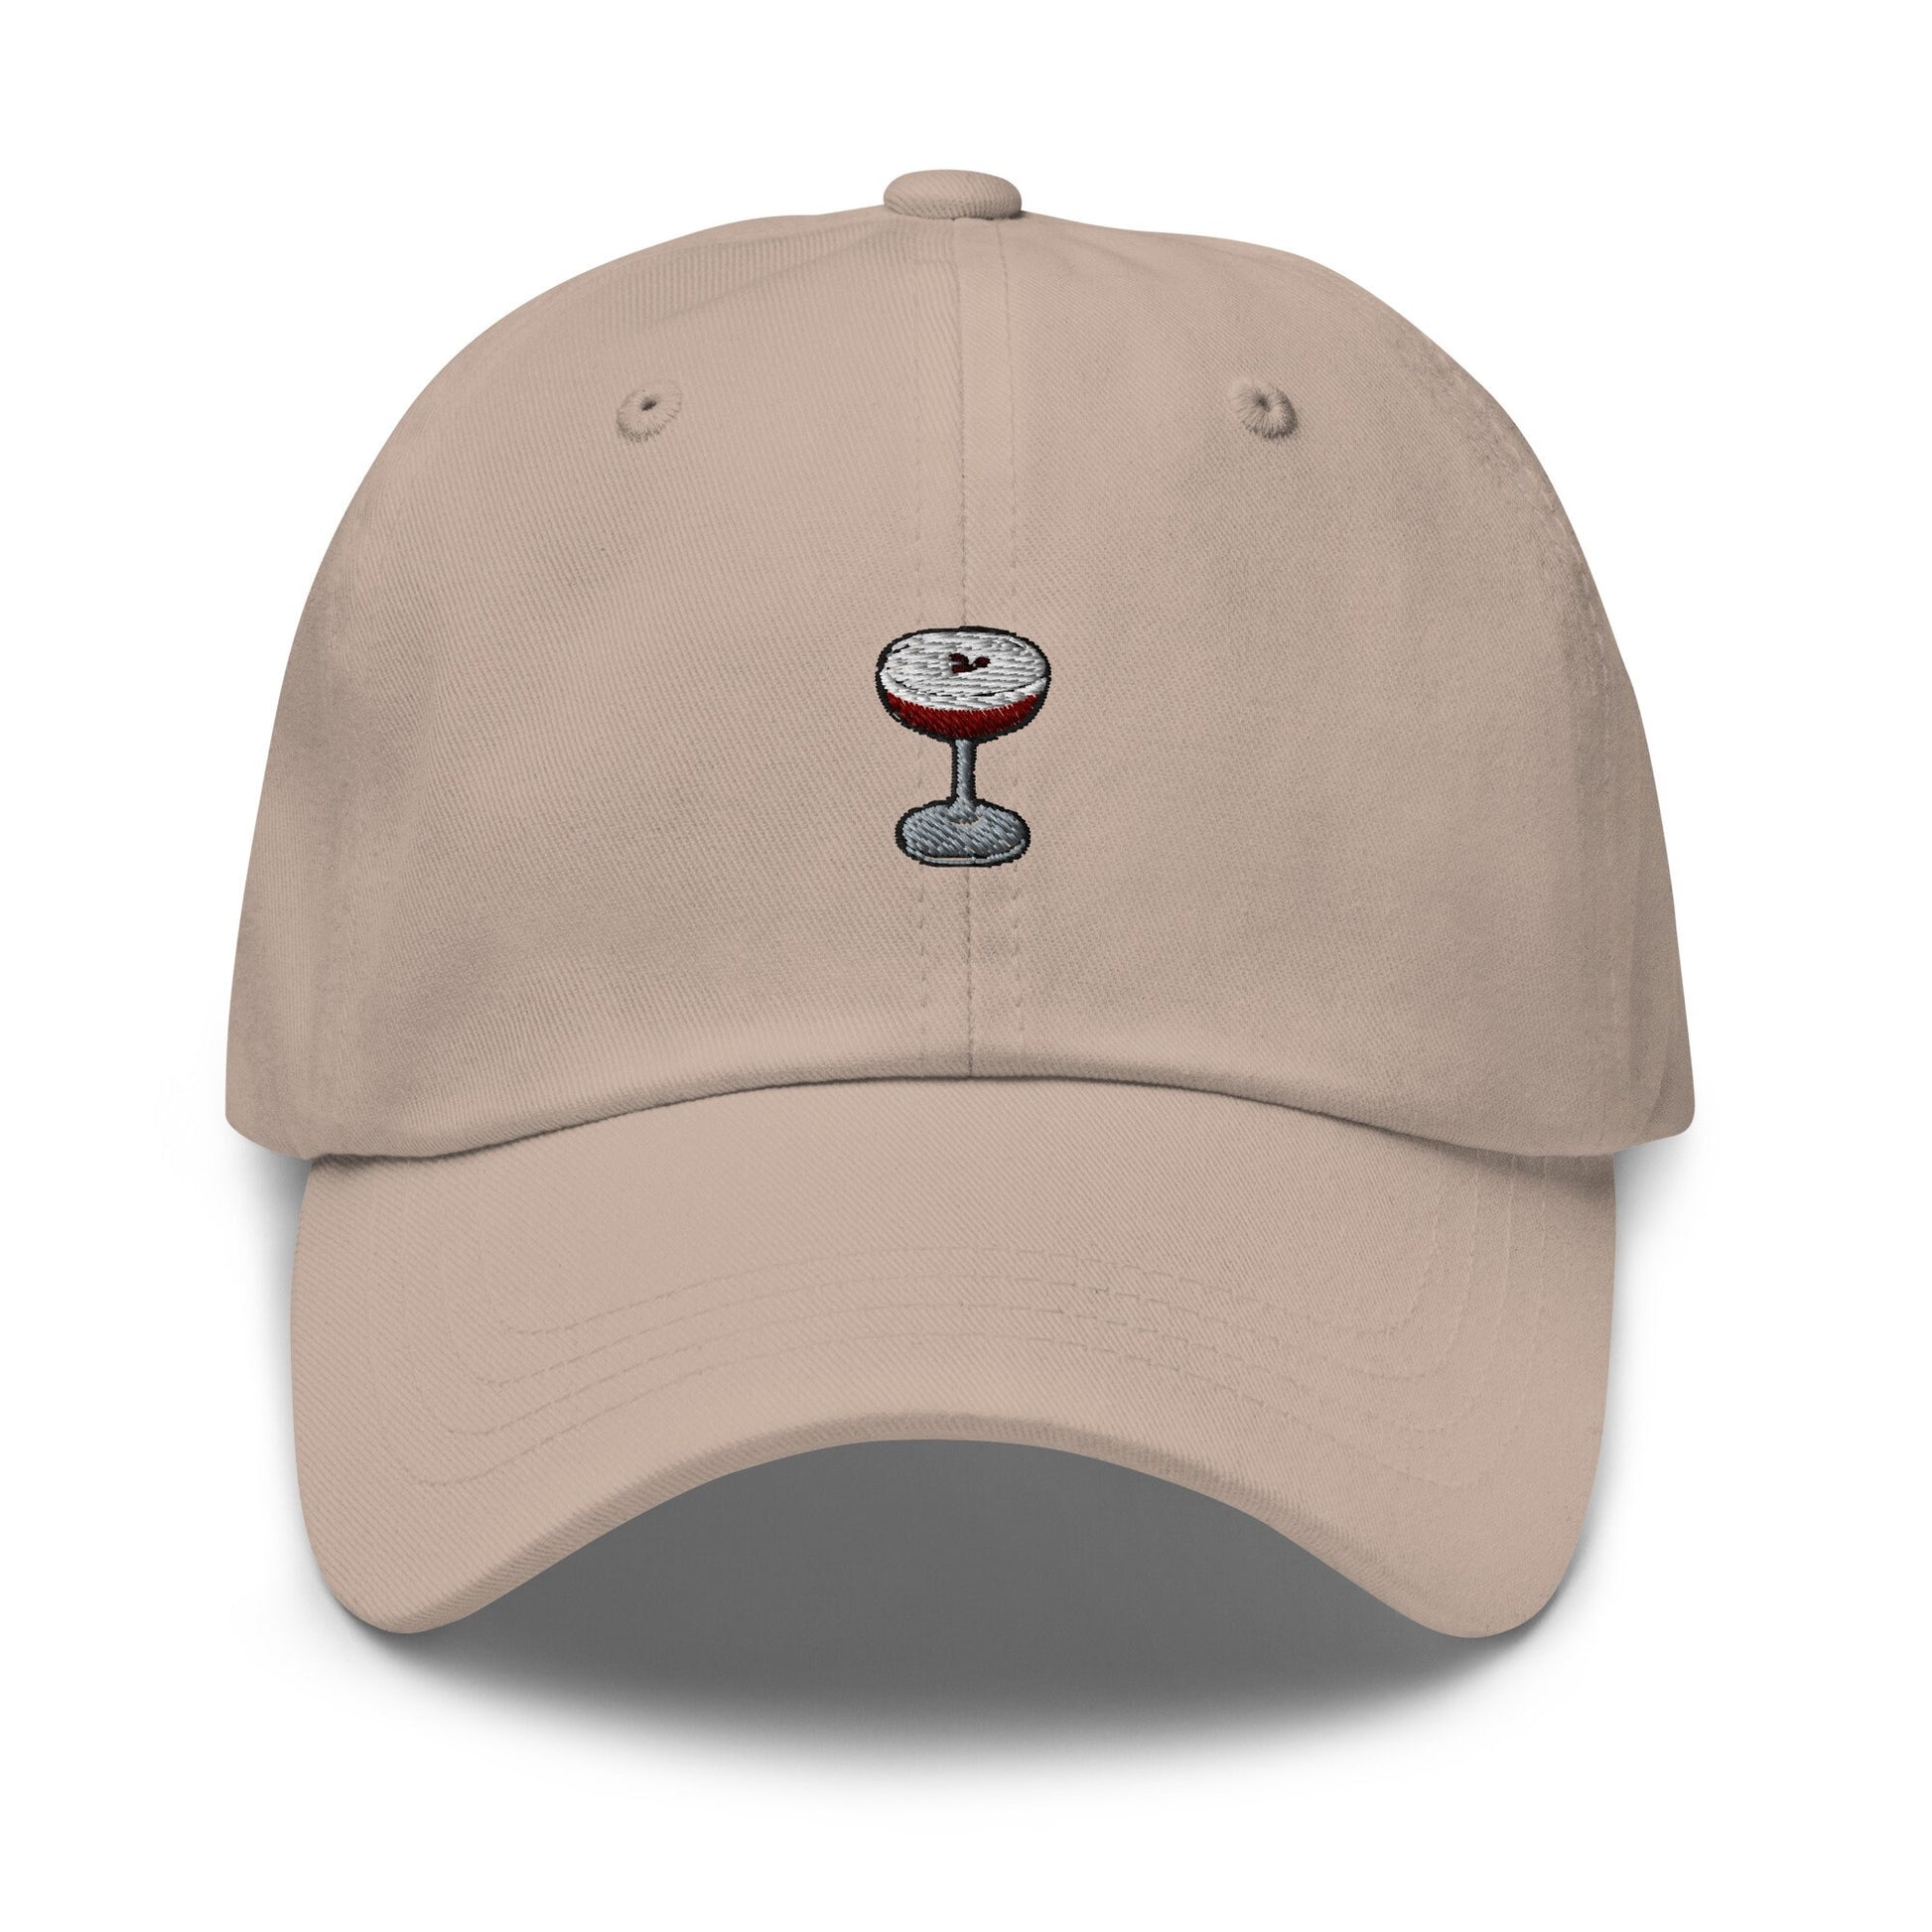 Embroidered Espresso Martini Hat - Gift for Cocktail Lovers - Minimalist Cap - Multiple Colours